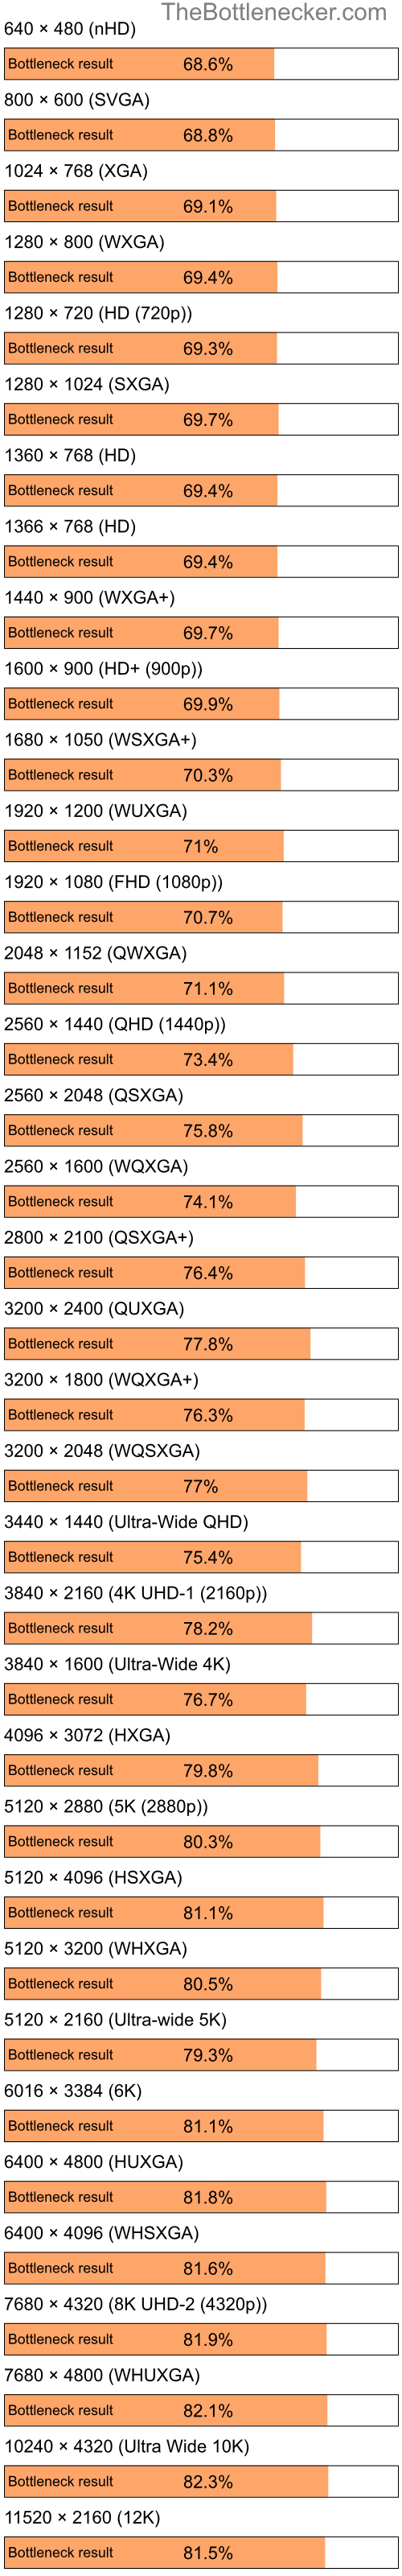 Bottleneck results by resolution for Intel Pentium 4 and NVIDIA GeForce 7025 in Processor Intense Tasks